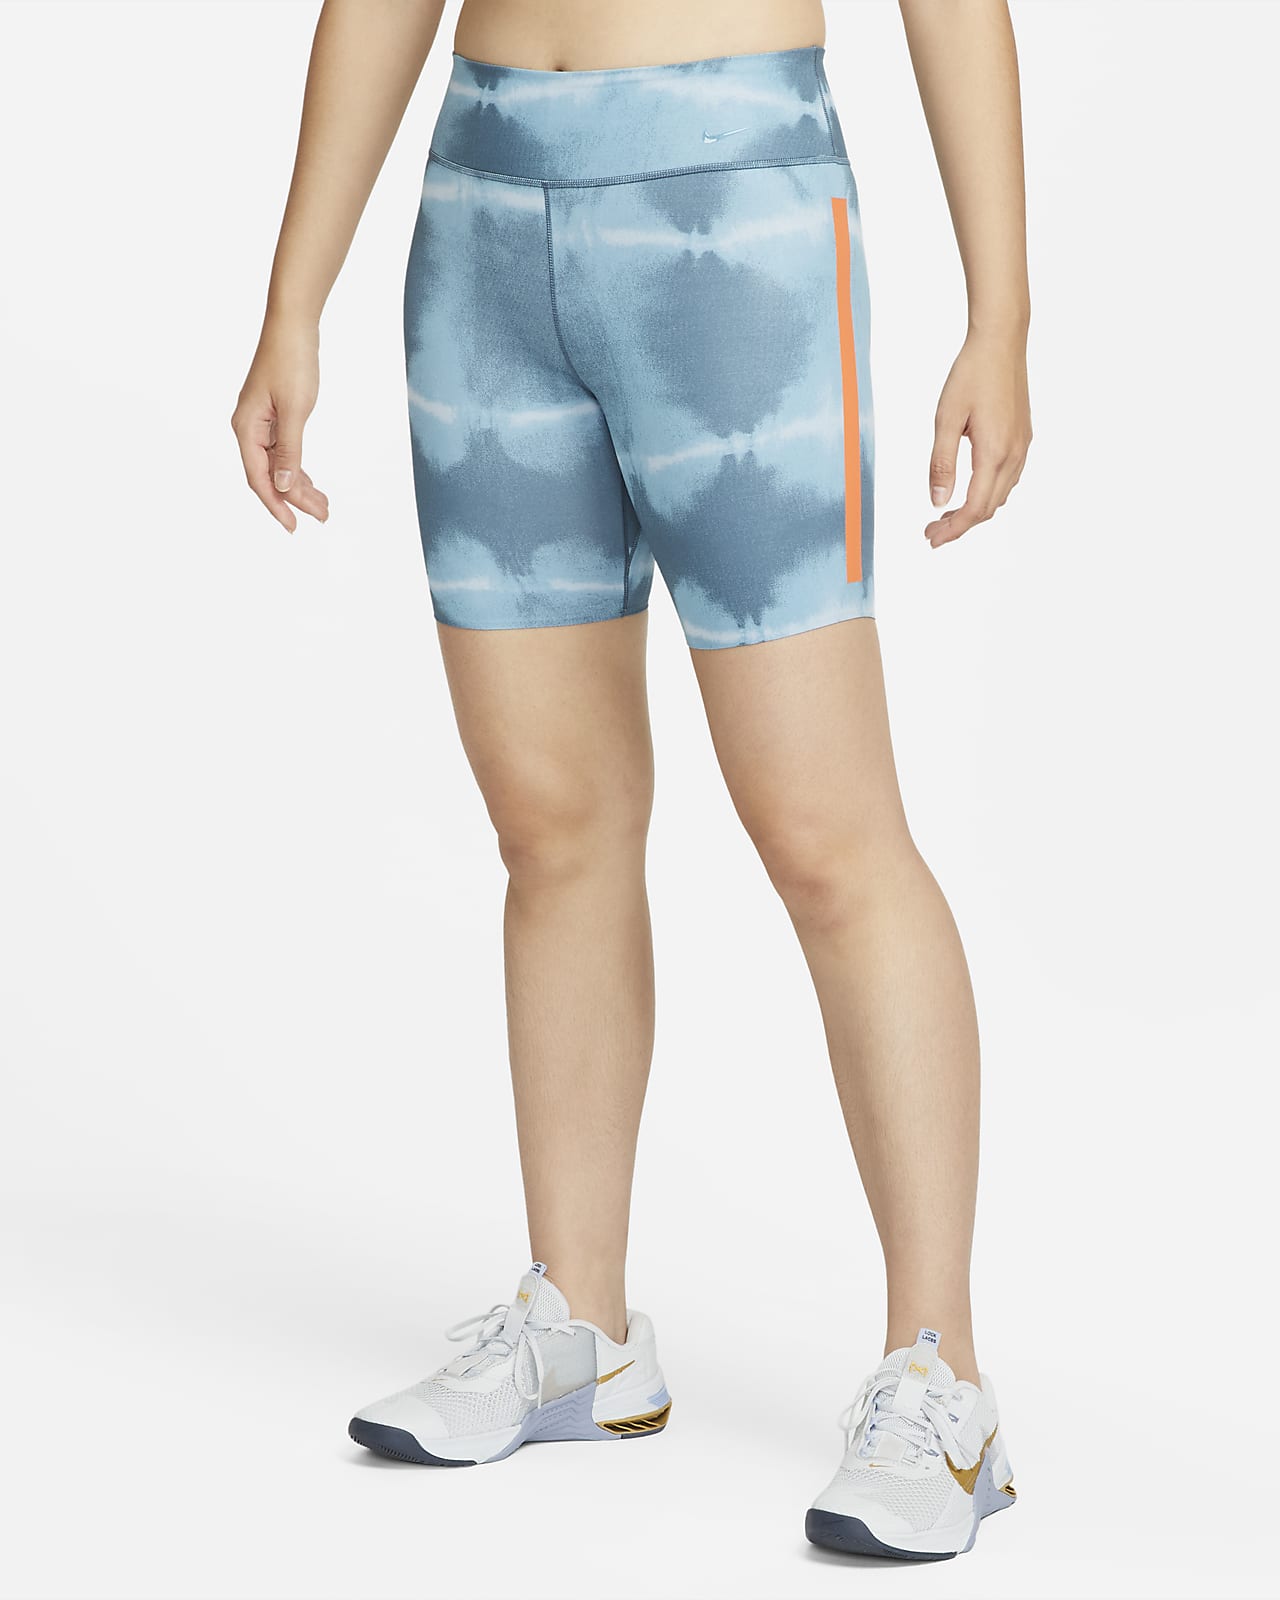 Nike One Luxe Women's 18cm (approx.) Mid-Rise Printed Training Shorts